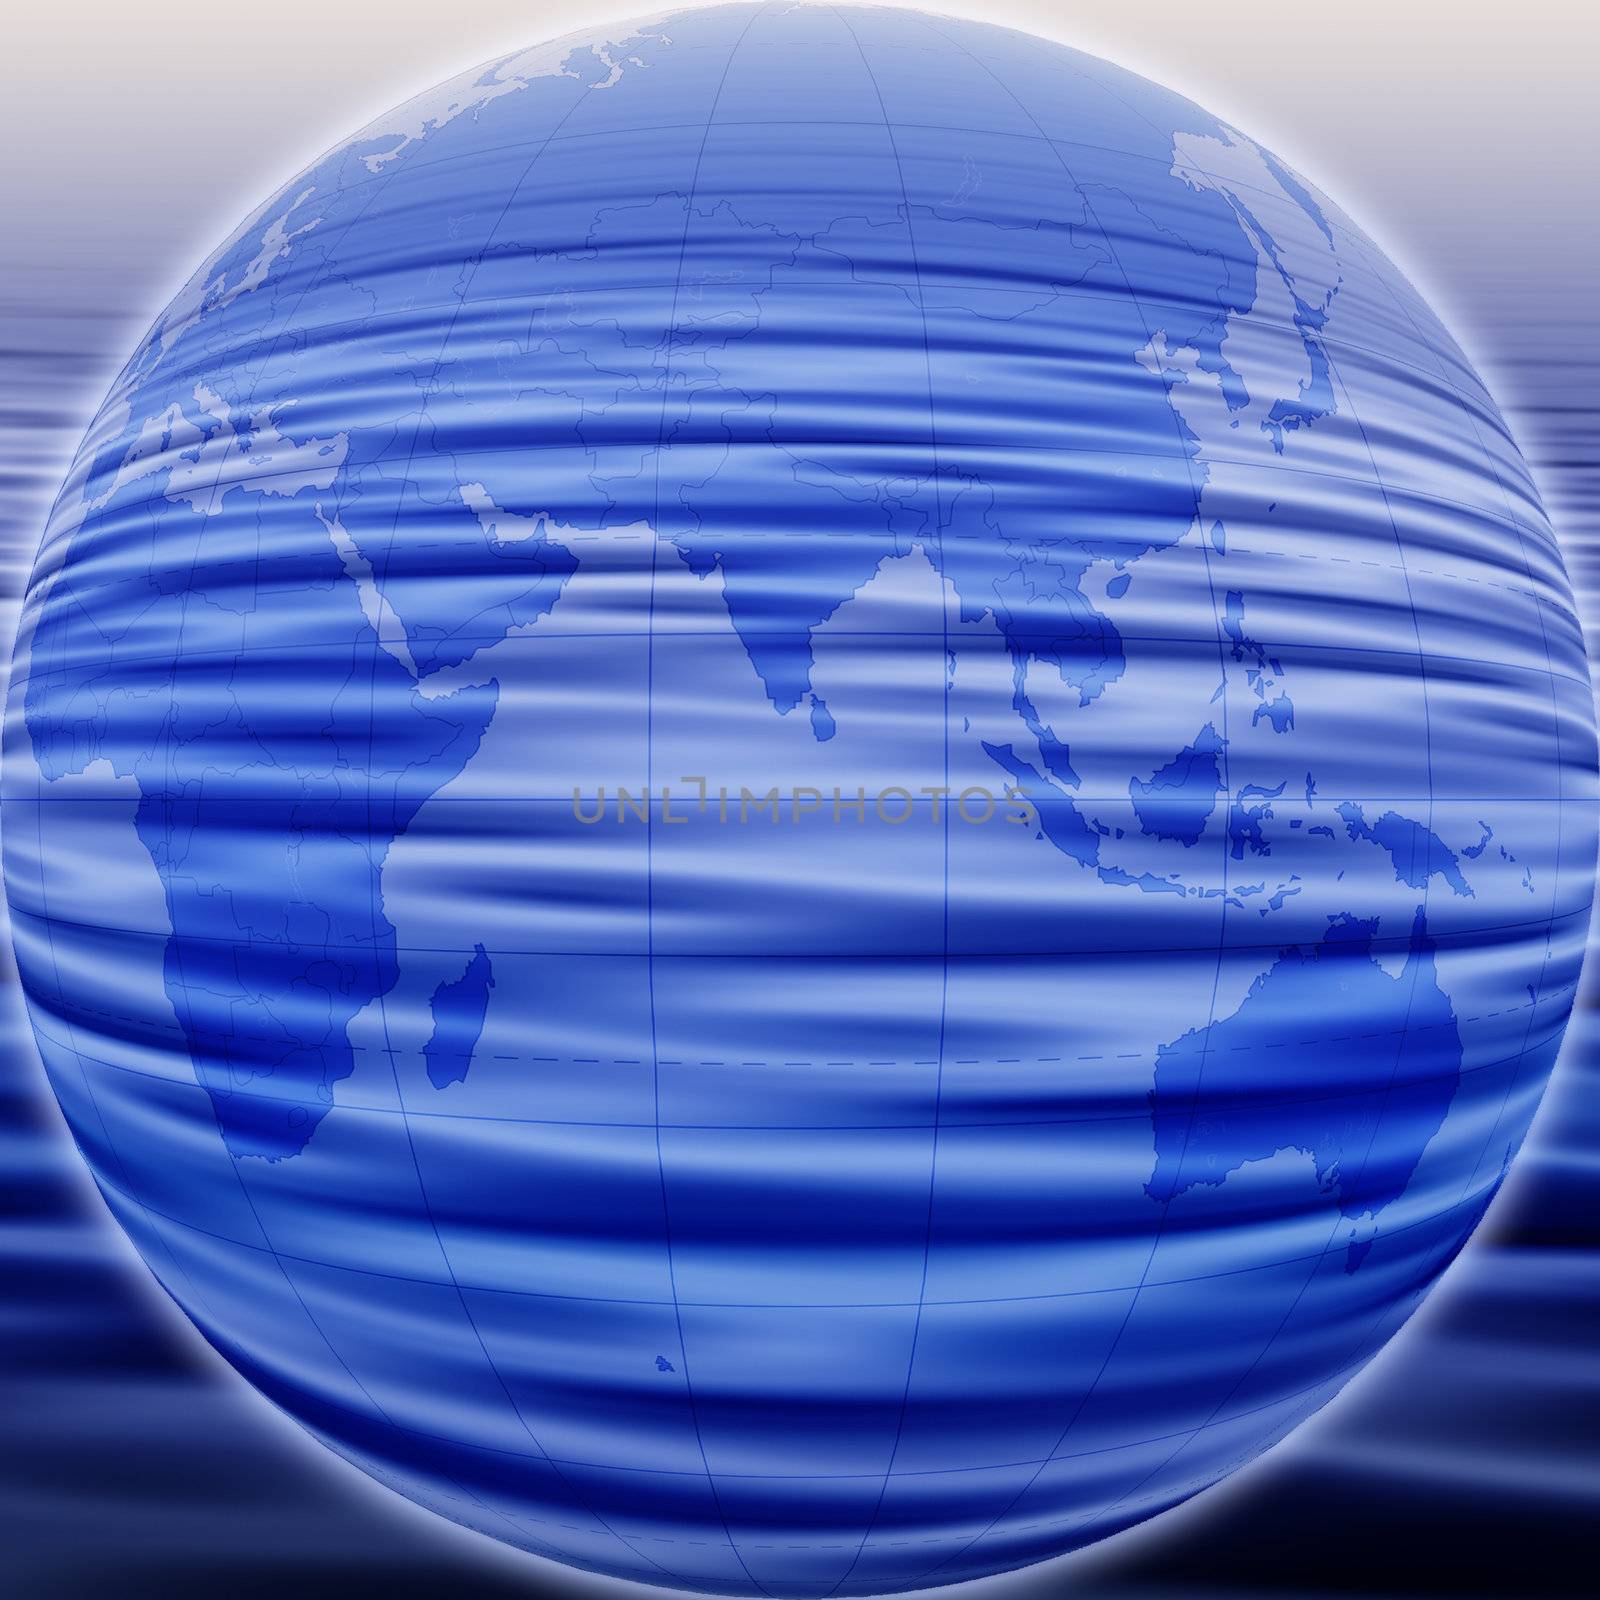 computer illustration of eatth with water ripples